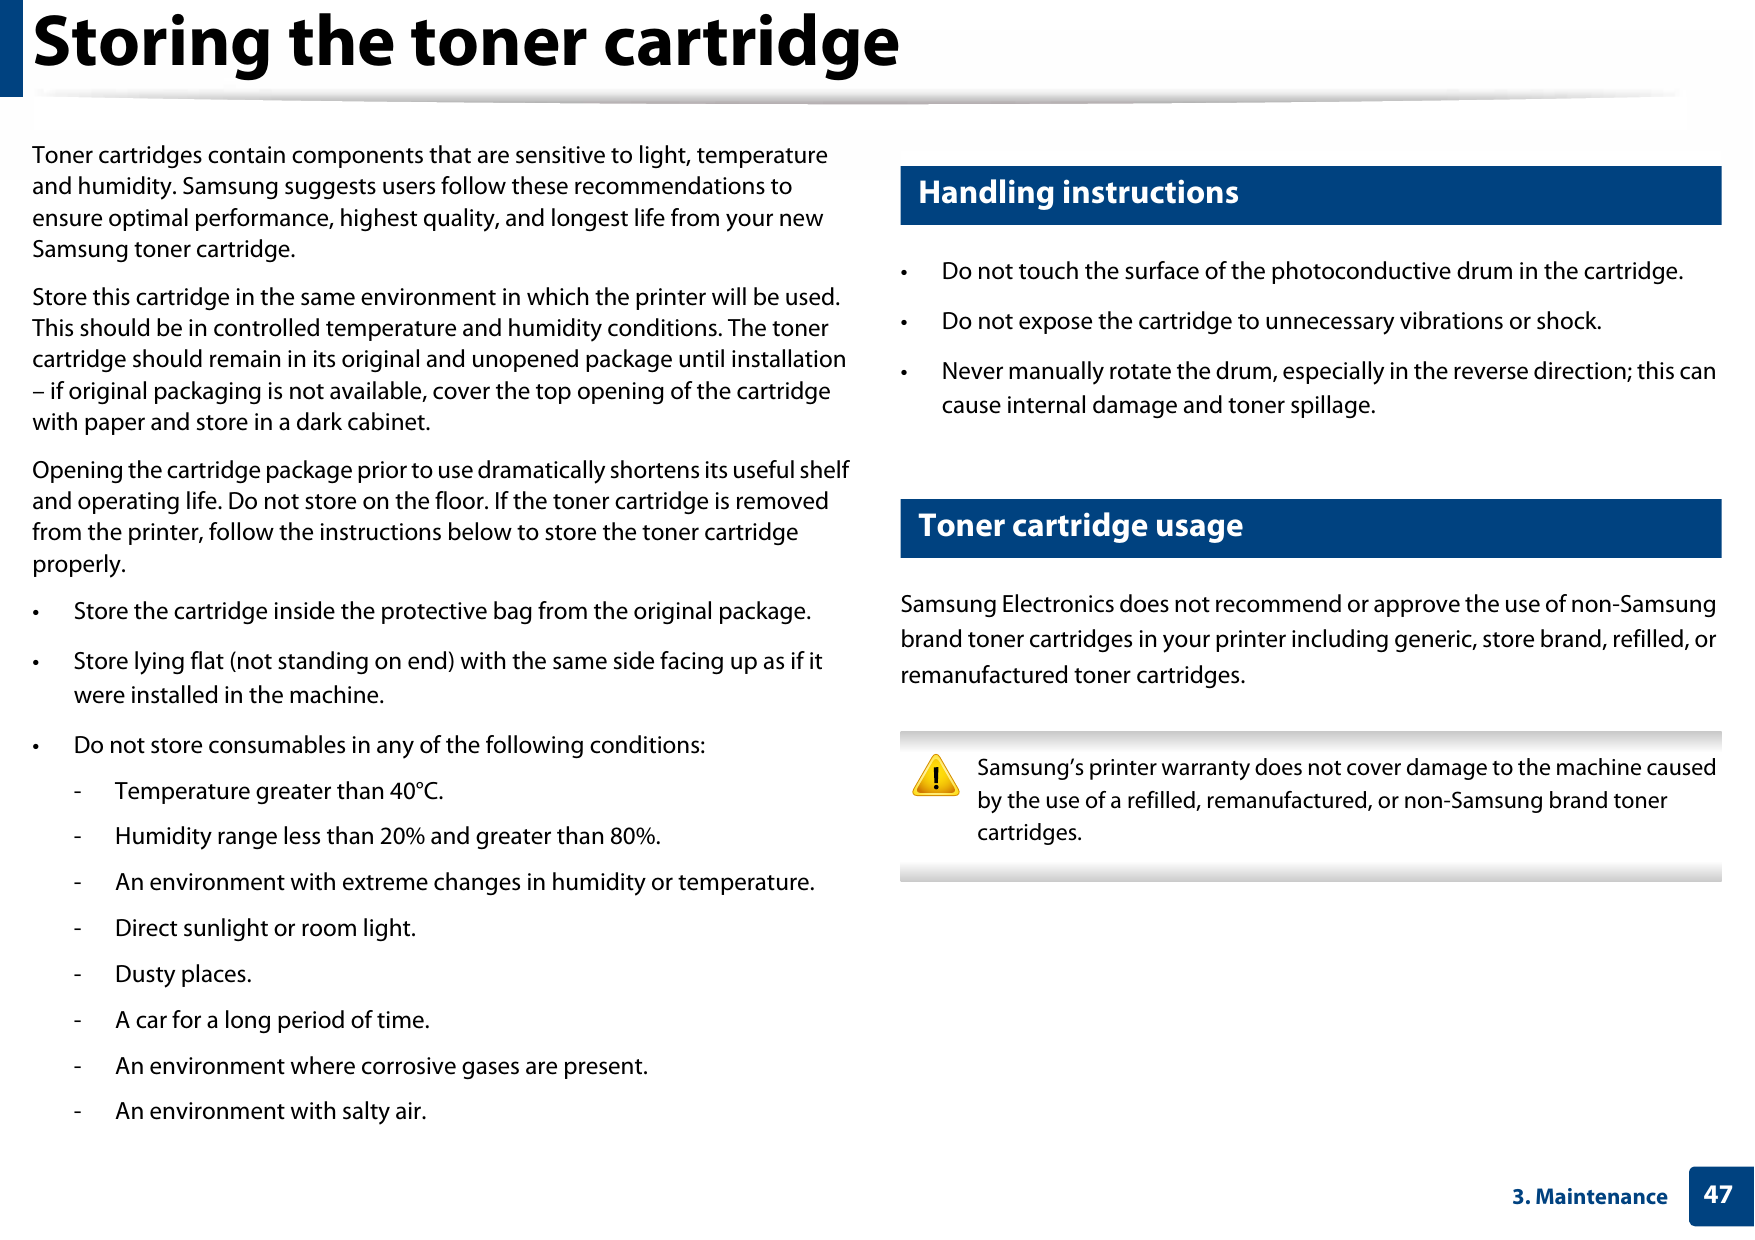 473. MaintenanceStoring the toner cartridgeToner cartridges contain components that are sensitive to light, temperature and humidity. Samsung suggests users follow these recommendations to ensure optimal performance, highest quality, and longest life from your new Samsung toner cartridge.Store this cartridge in the same environment in which the printer will be used. This should be in controlled temperature and humidity conditions. The toner cartridge should remain in its original and unopened package until installation – if original packaging is not available, cover the top opening of the cartridge with paper and store in a dark cabinet.Opening the cartridge package prior to use dramatically shortens its useful shelf and operating life. Do not store on the floor. If the toner cartridge is removed from the printer, follow the instructions below to store the toner cartridge properly.• Store the cartridge inside the protective bag from the original package. • Store lying flat (not standing on end) with the same side facing up as if it were installed in the machine.• Do not store consumables in any of the following conditions:- Temperature greater than 40°C.- Humidity range less than 20% and greater than 80%.- An environment with extreme changes in humidity or temperature.- Direct sunlight or room light.- Dusty places.- A car for a long period of time.- An environment where corrosive gases are present.- An environment with salty air.1 Handling instructions• Do not touch the surface of the photoconductive drum in the cartridge.• Do not expose the cartridge to unnecessary vibrations or shock.• Never manually rotate the drum, especially in the reverse direction; this can cause internal damage and toner spillage.2 Toner cartridge usageSamsung Electronics does not recommend or approve the use of non-Samsung brand toner cartridges in your printer including generic, store brand, refilled, or remanufactured toner cartridges. Samsung’s printer warranty does not cover damage to the machine caused by the use of a refilled, remanufactured, or non-Samsung brand toner cartridges. 